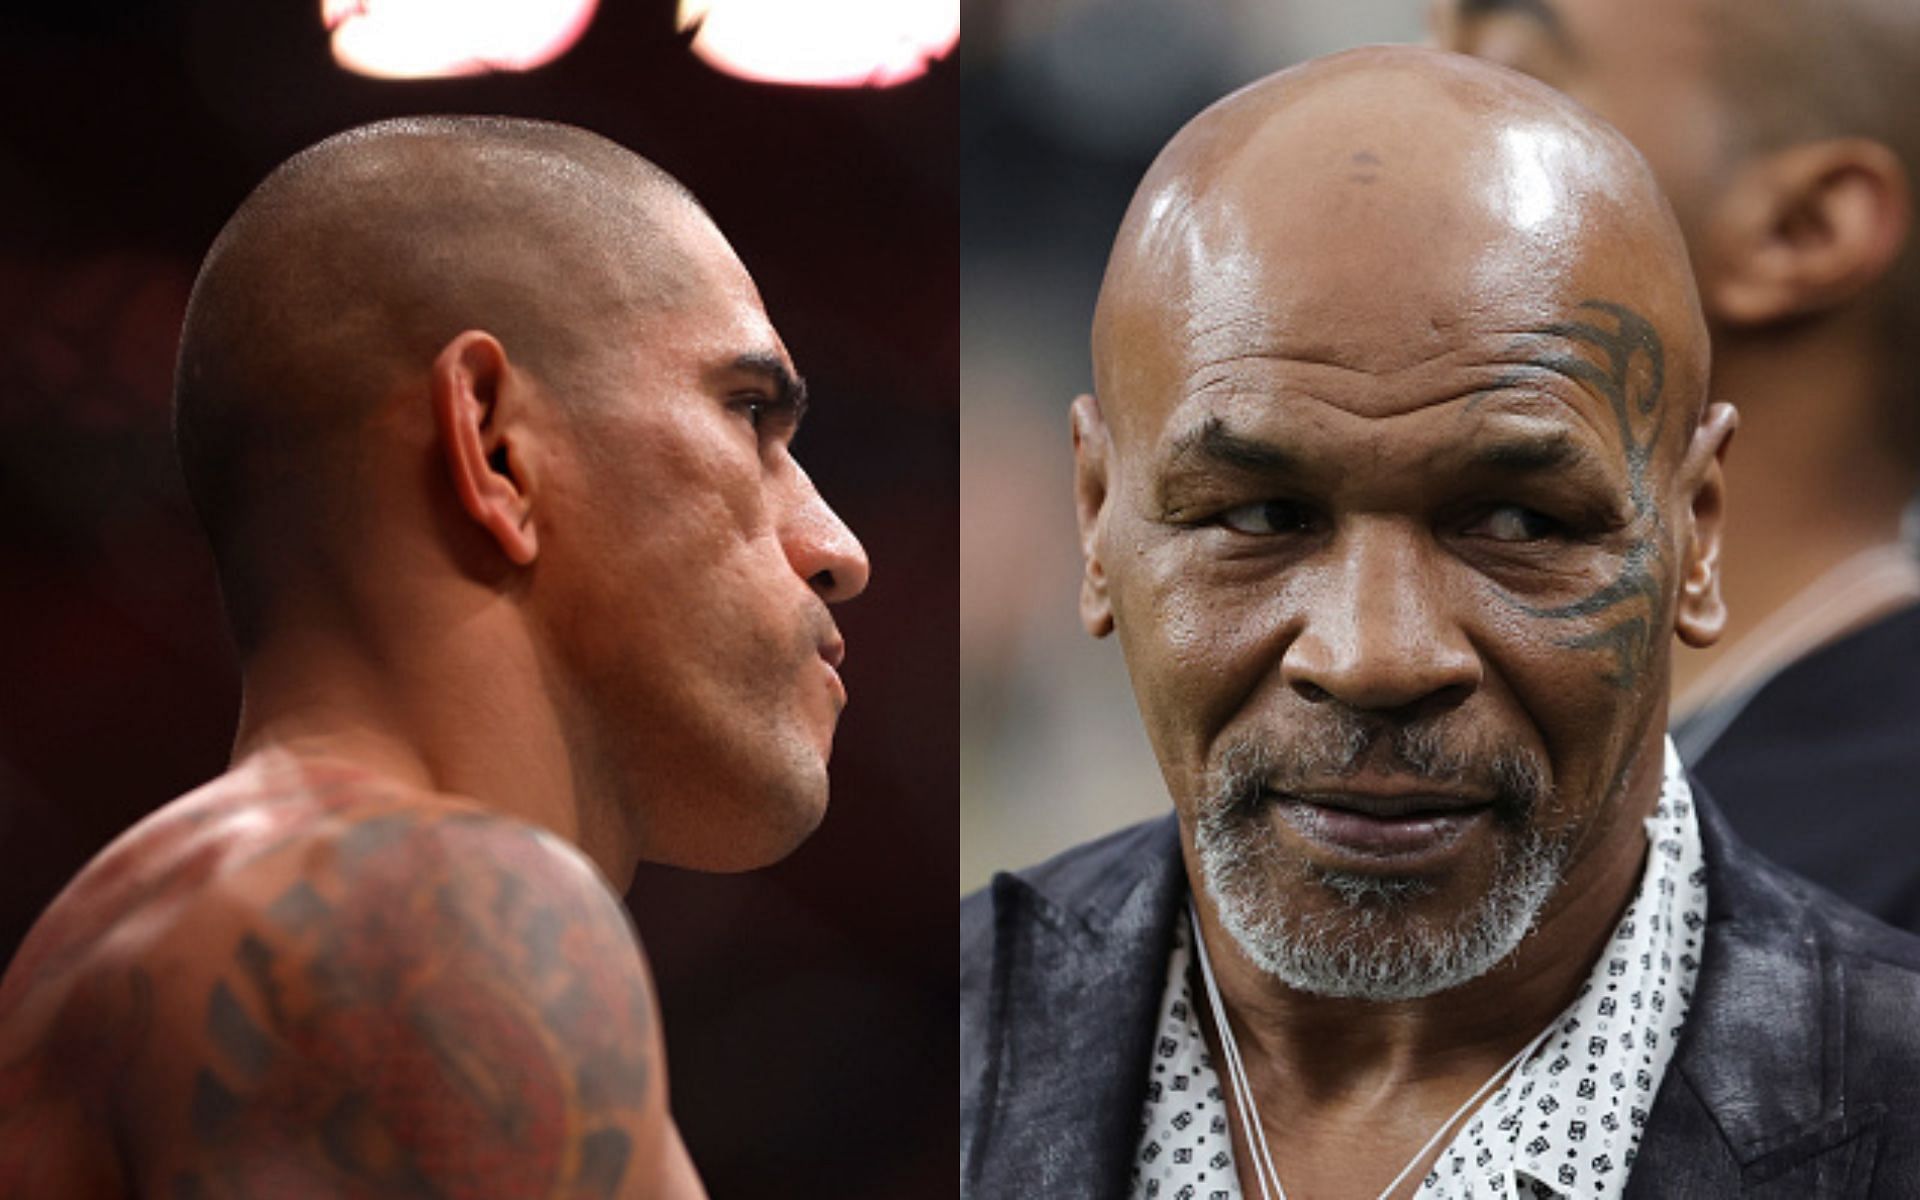 Alex Pereira (left) draws comparison to Mike Tyson (right) [Image credits: Getty Images]